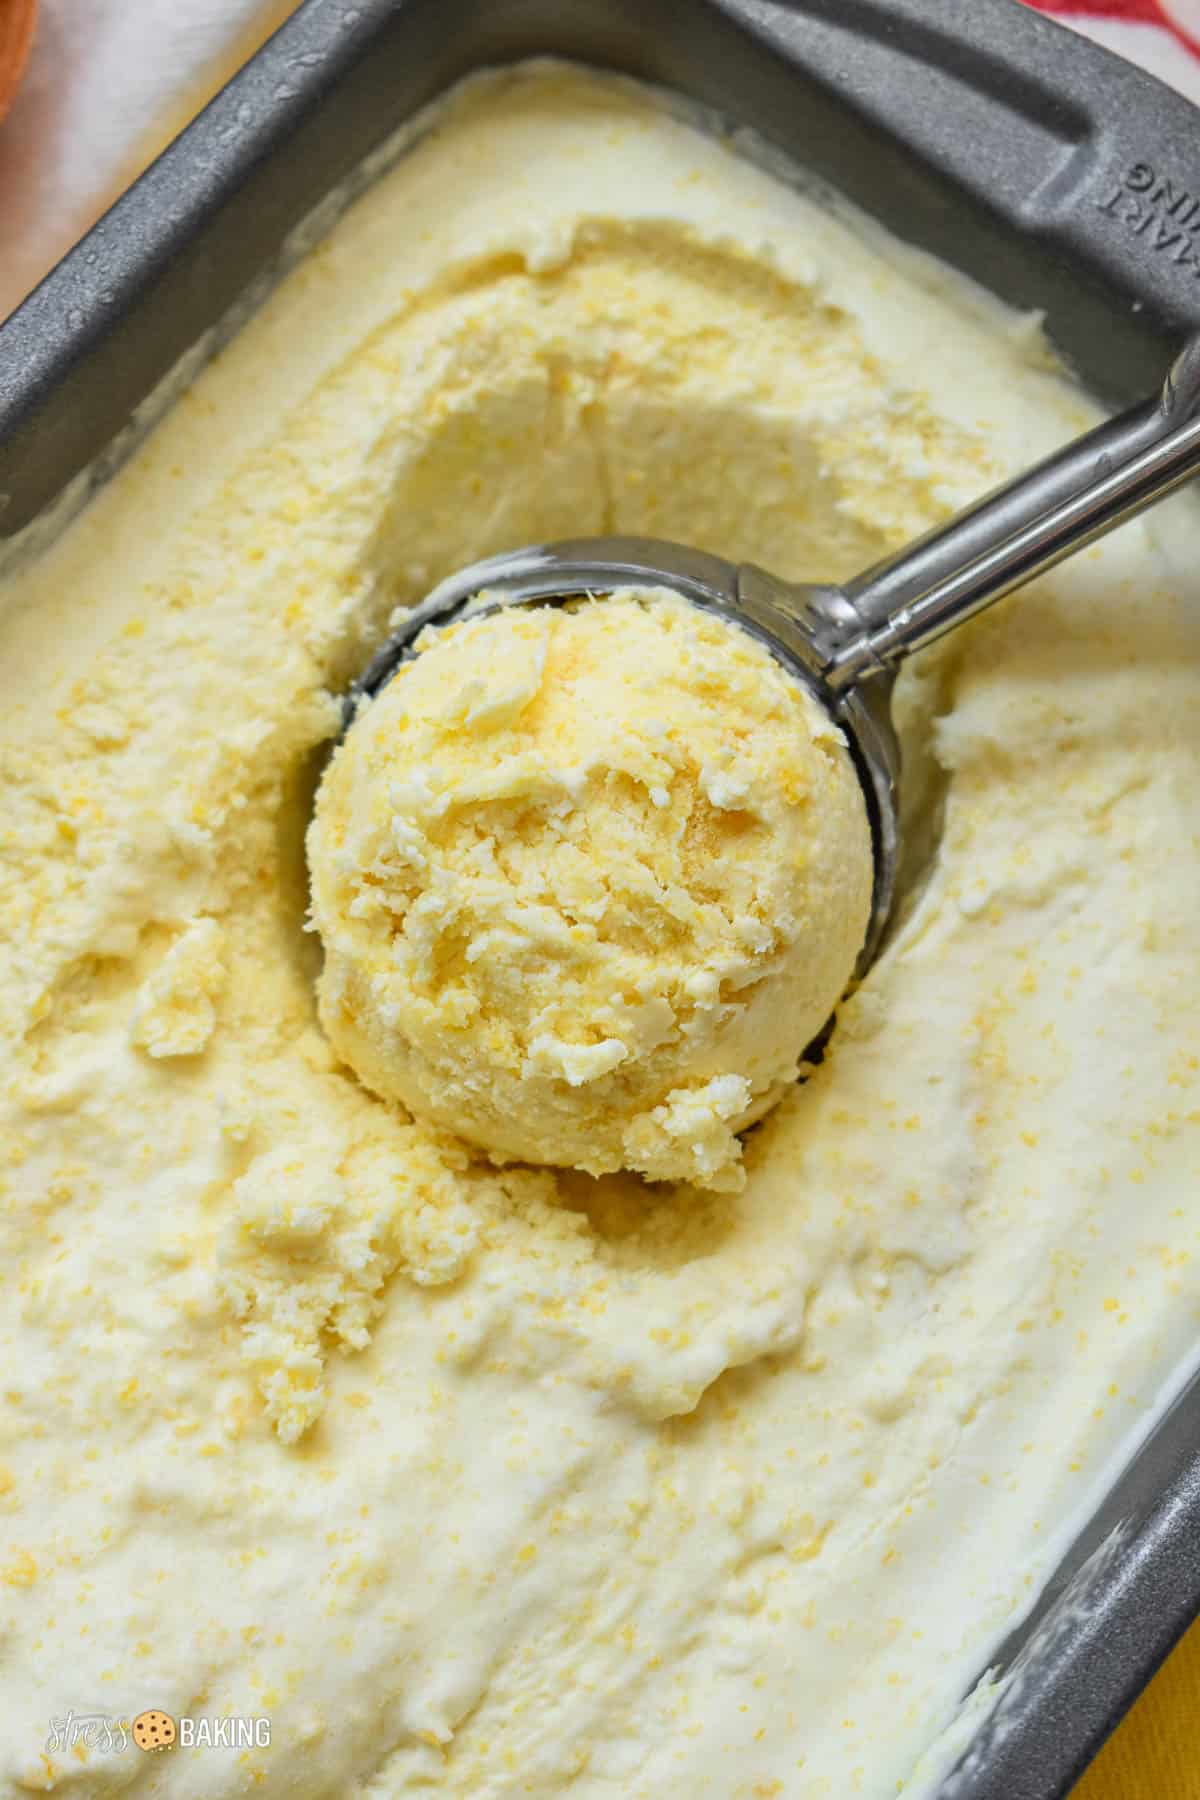 Yellow corn ice cream being scooped out of a loaf pan